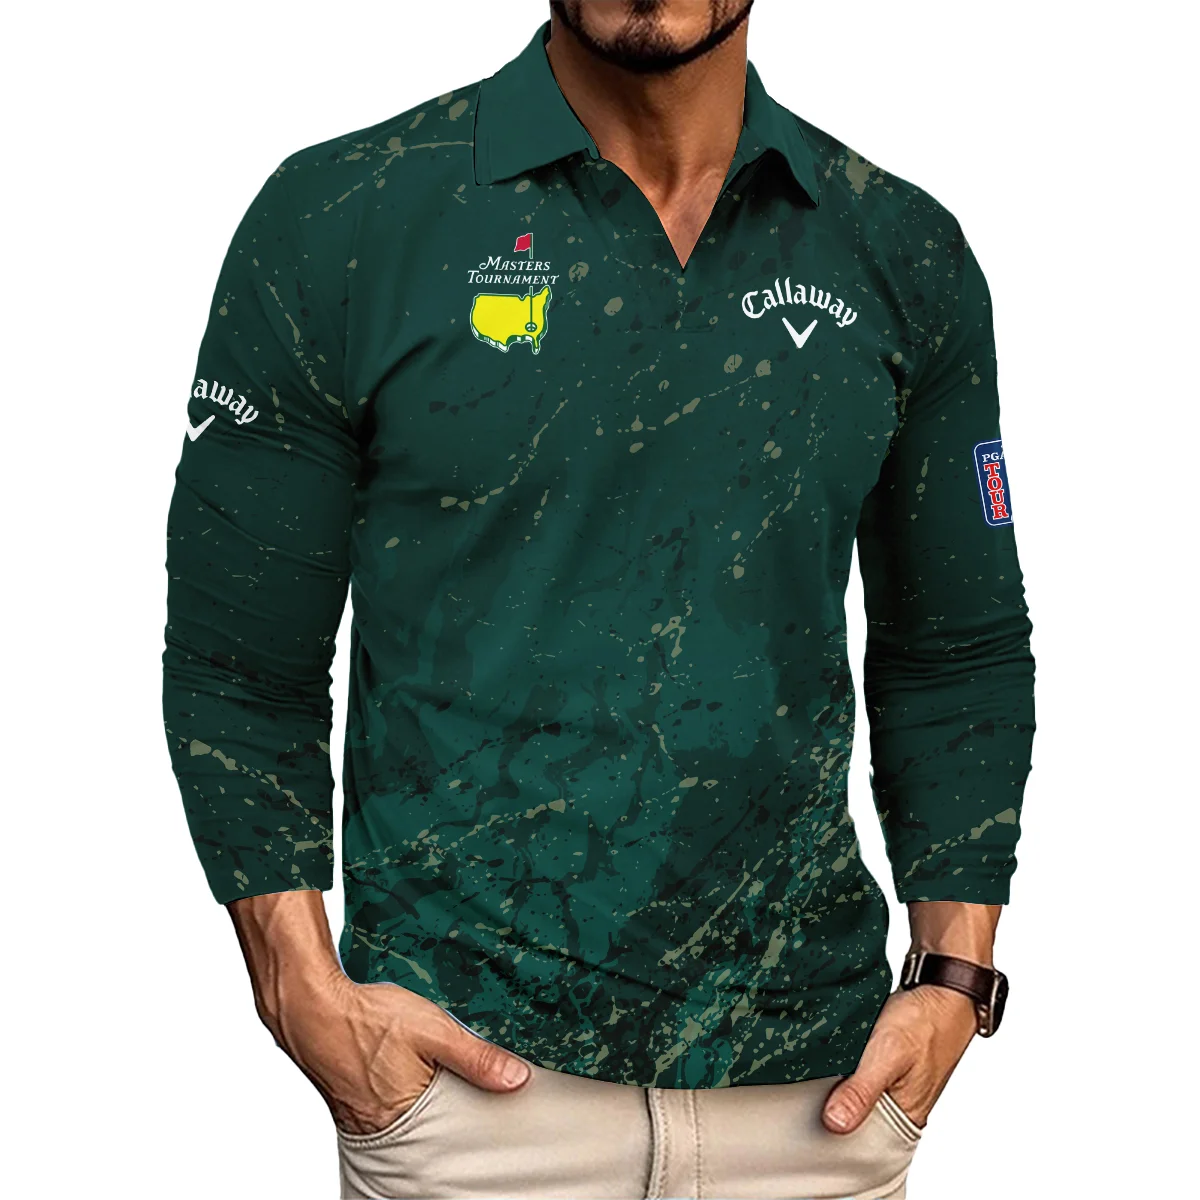 Old Cracked Texture With Gold Splash Paint Masters Tournament Callaway Vneck Polo Shirt Style Classic Polo Shirt For Men